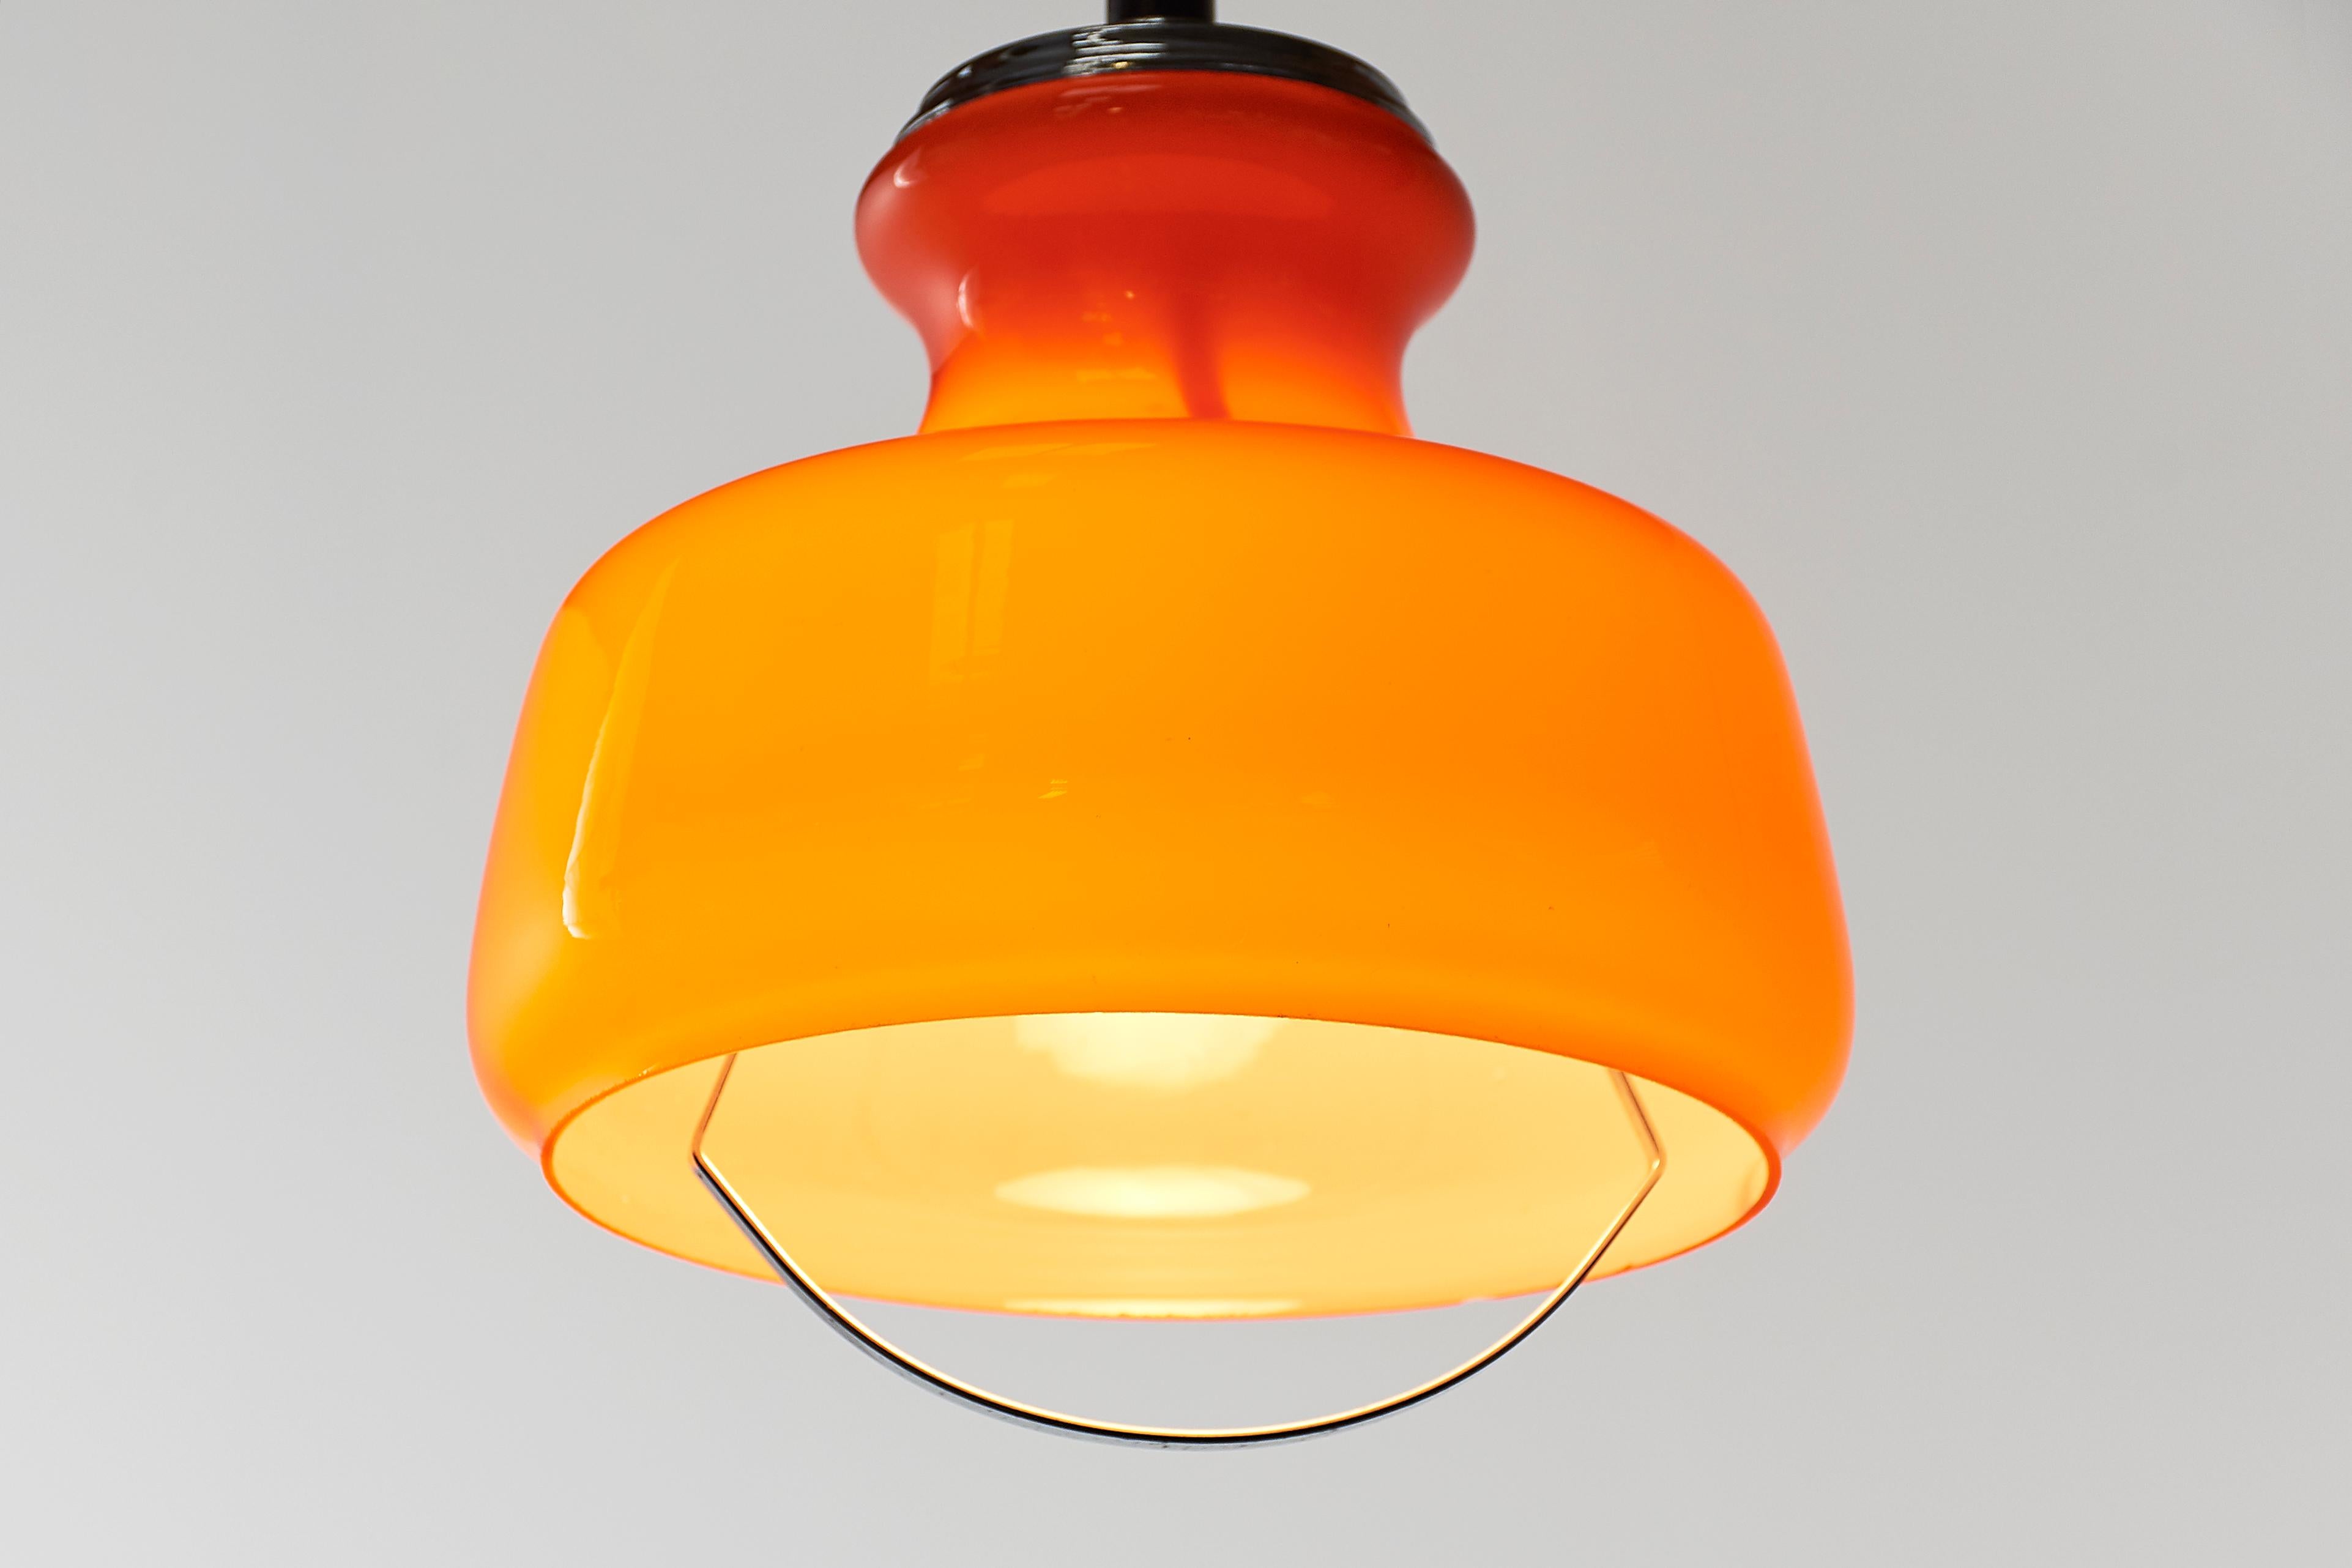 Chic with the vibe of midcentury Organic Modern cool. This orange opaque Murano glass pendant lamp has sumptuous curves, elegant chrome-plated accents including a 